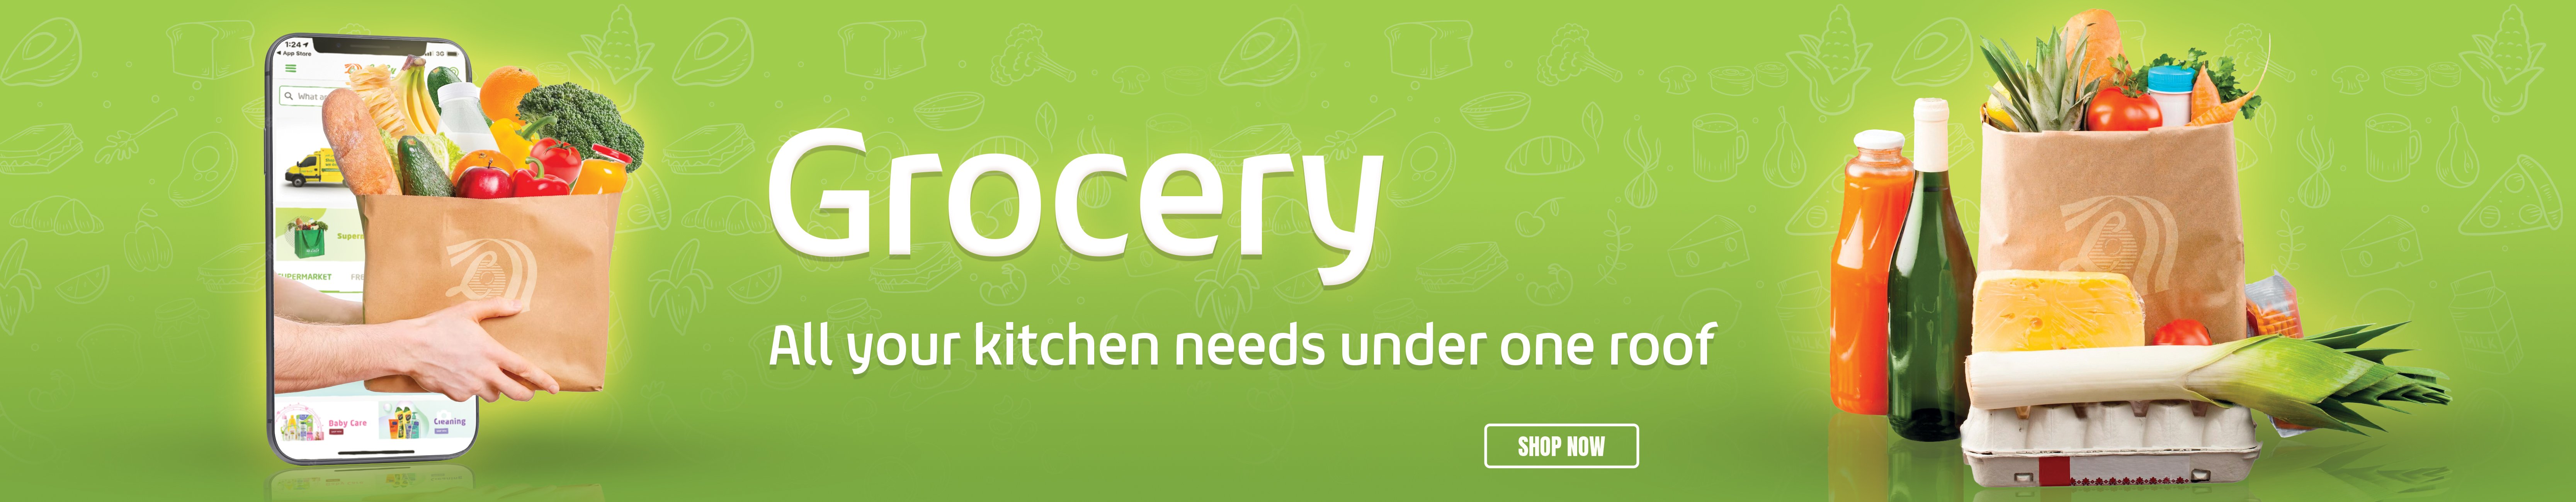 Grocery Main Banner